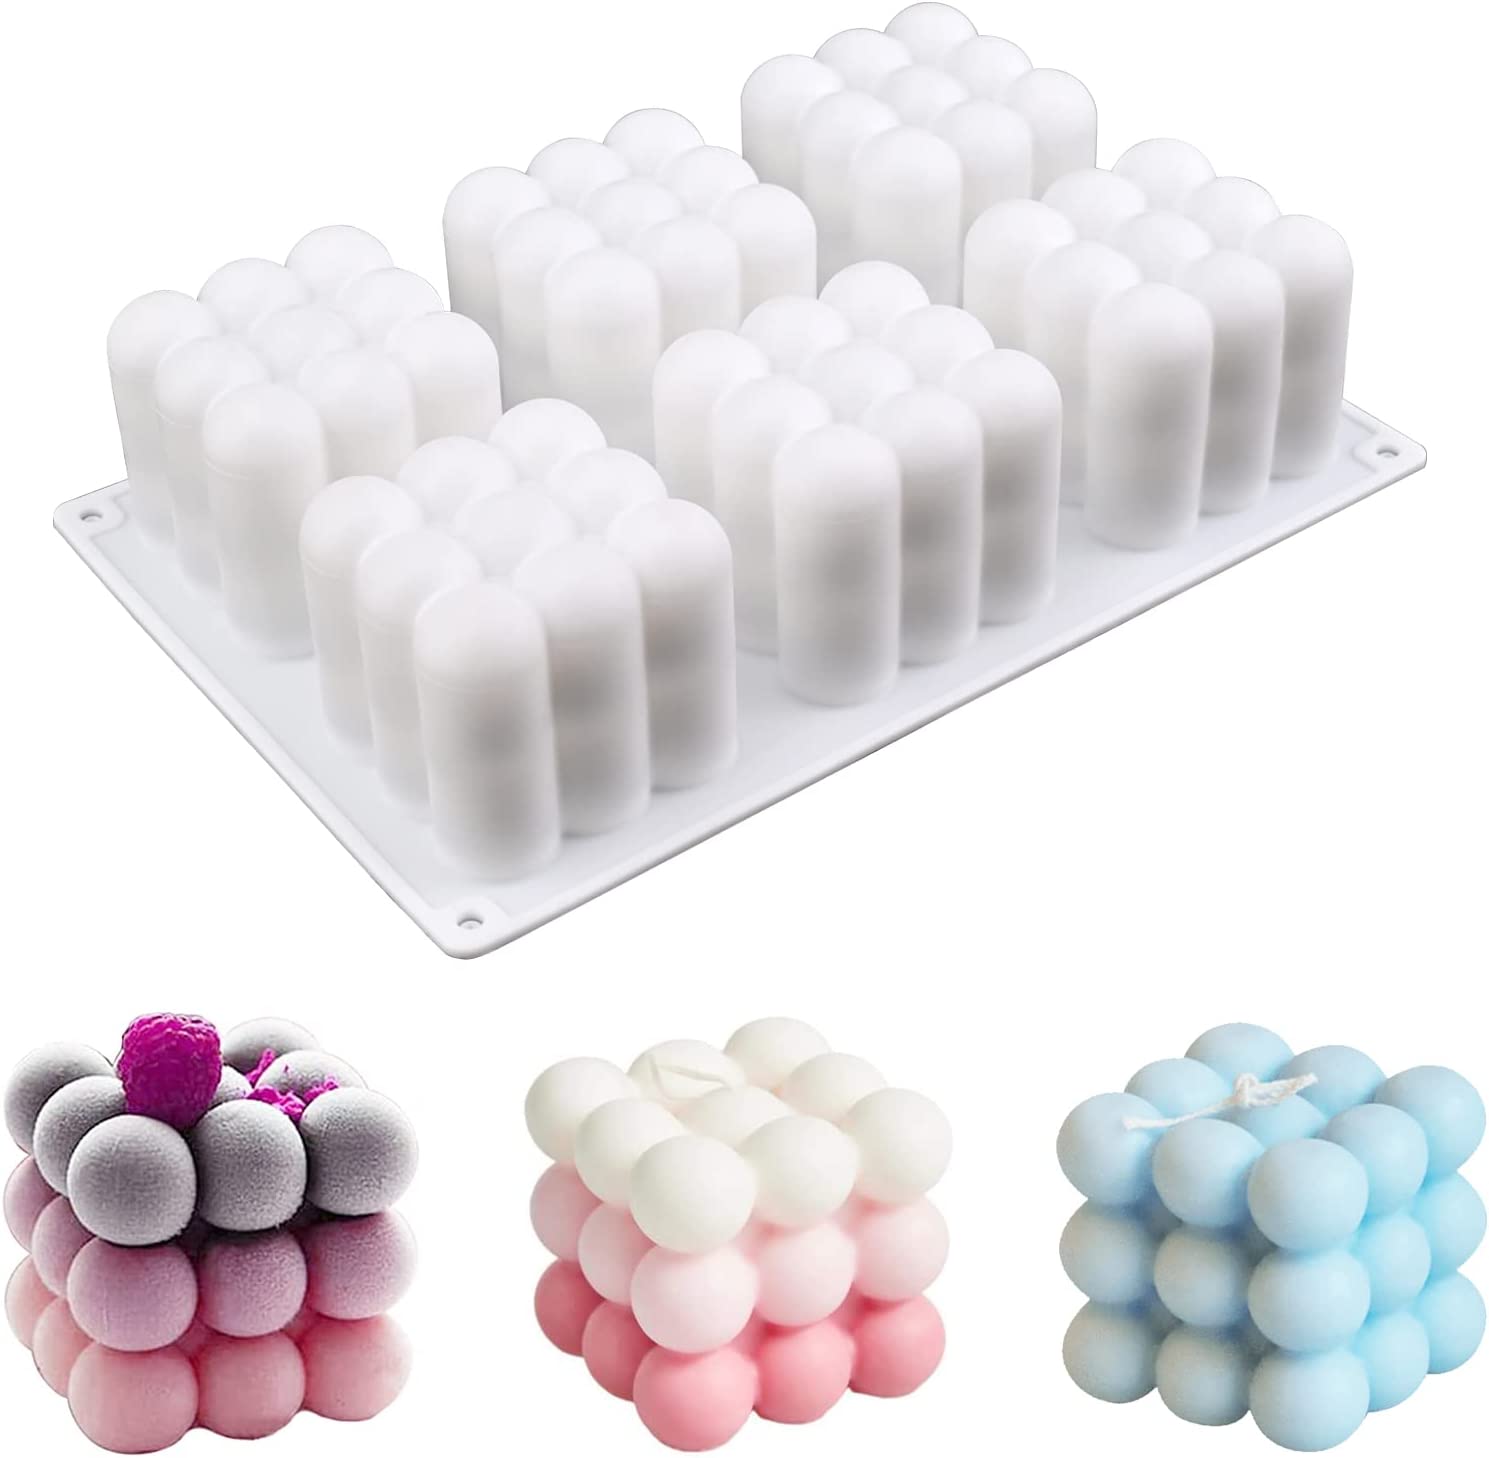 SILICANDO Bubble Candle Silicone Mold, 15 in1 Handmade Soy Wax Mold, 3D  Mini Bubble Cube Ball Resin Candle Mold, Mousse Cake Mold for Soap,  Pudding